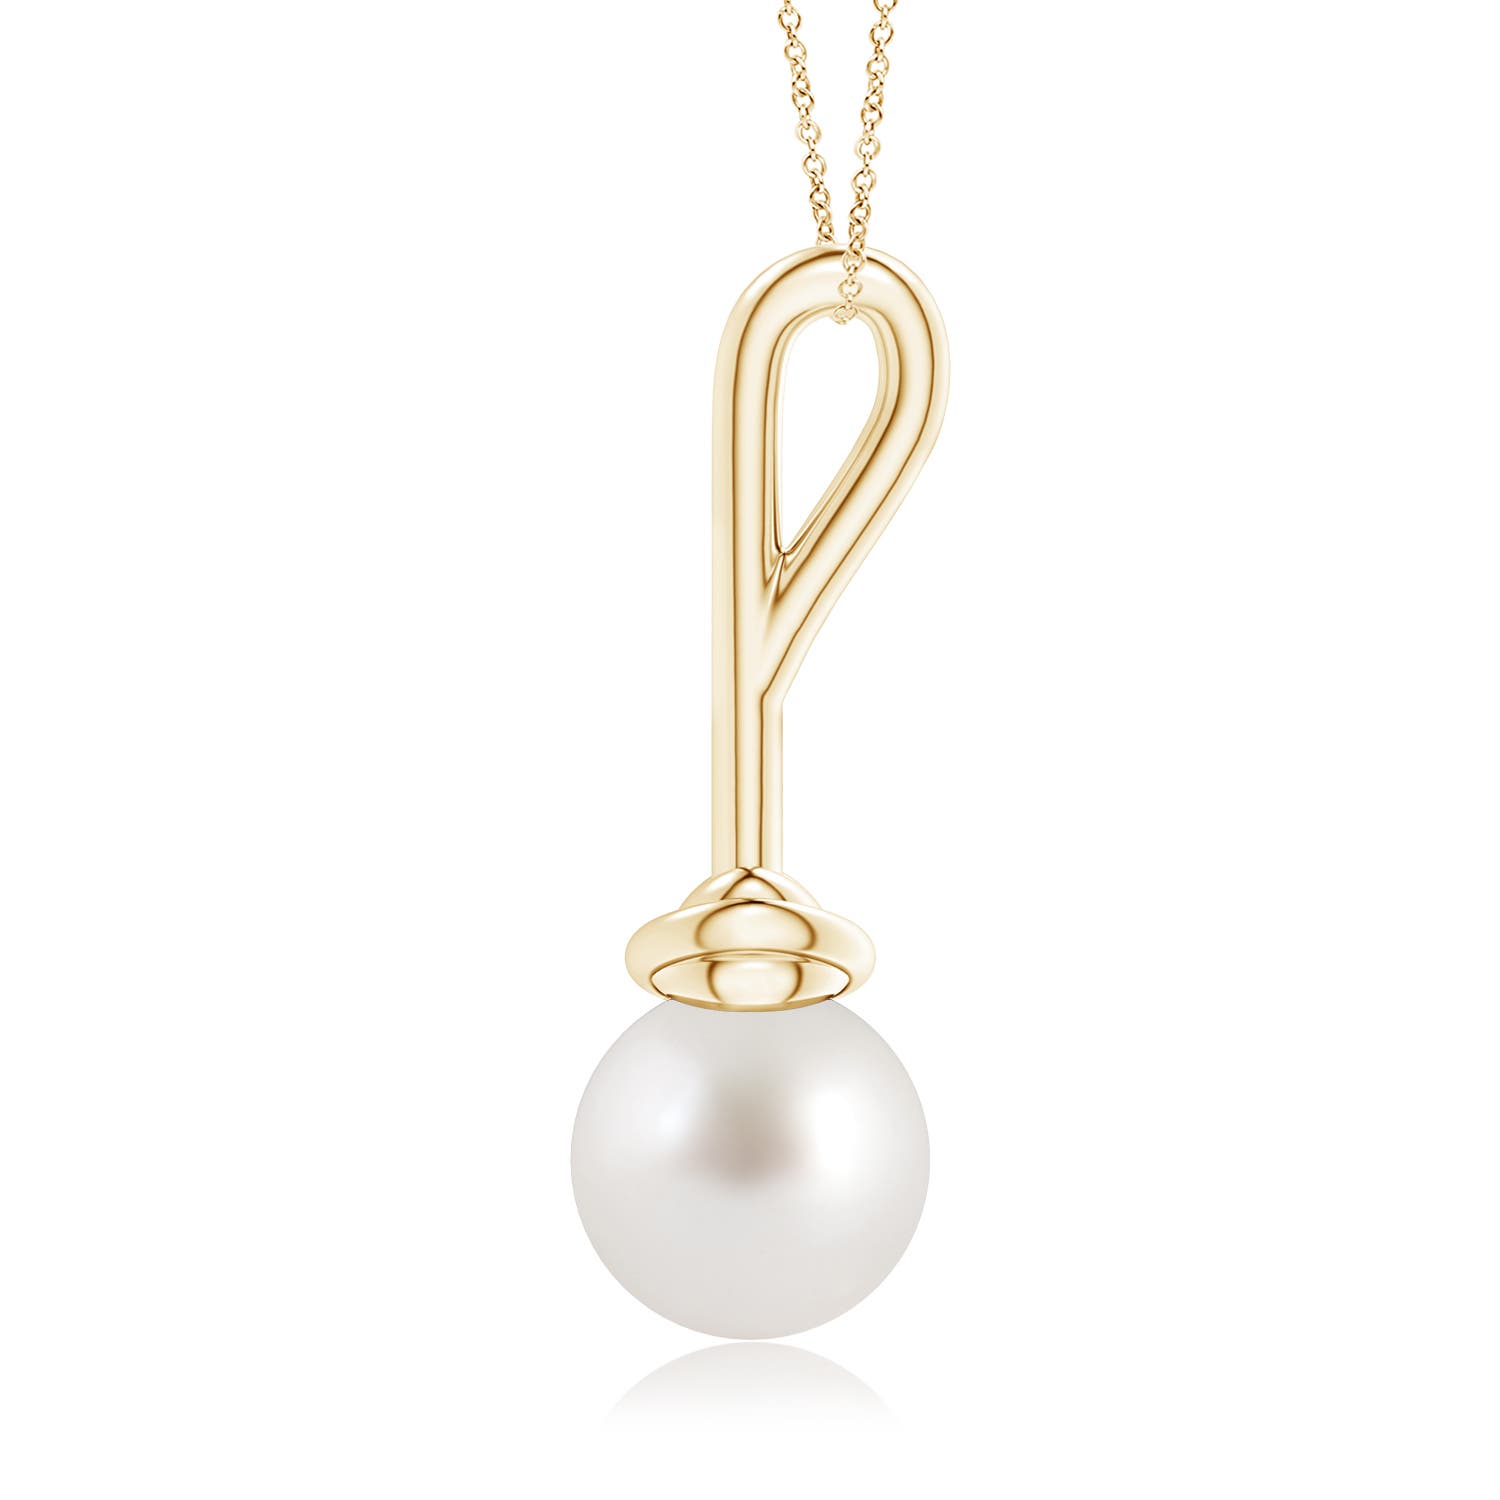 AAA - South Sea Cultured Pearl / 7.2 CT / 14 KT Yellow Gold